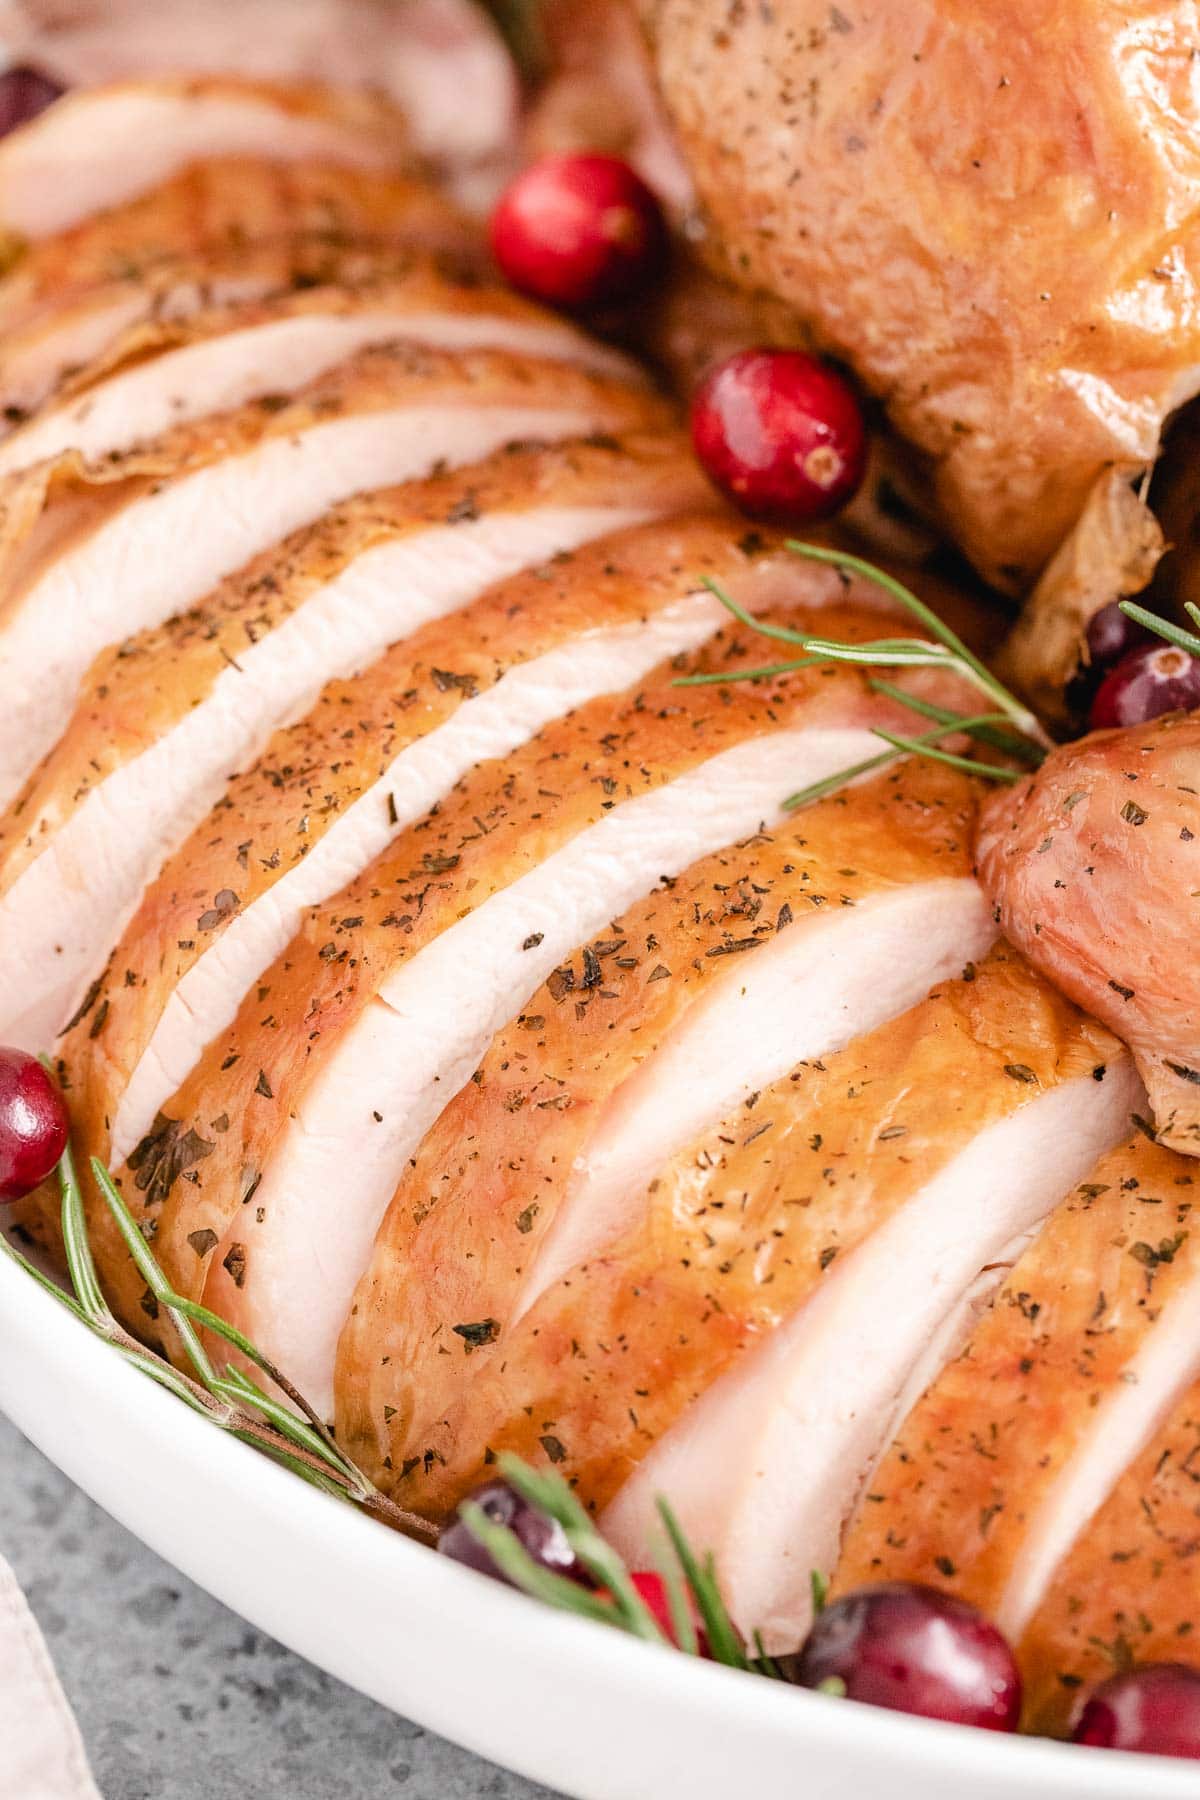 A close up of a sliced turkey breast with the skin on garnished with cranberries and rosemary.